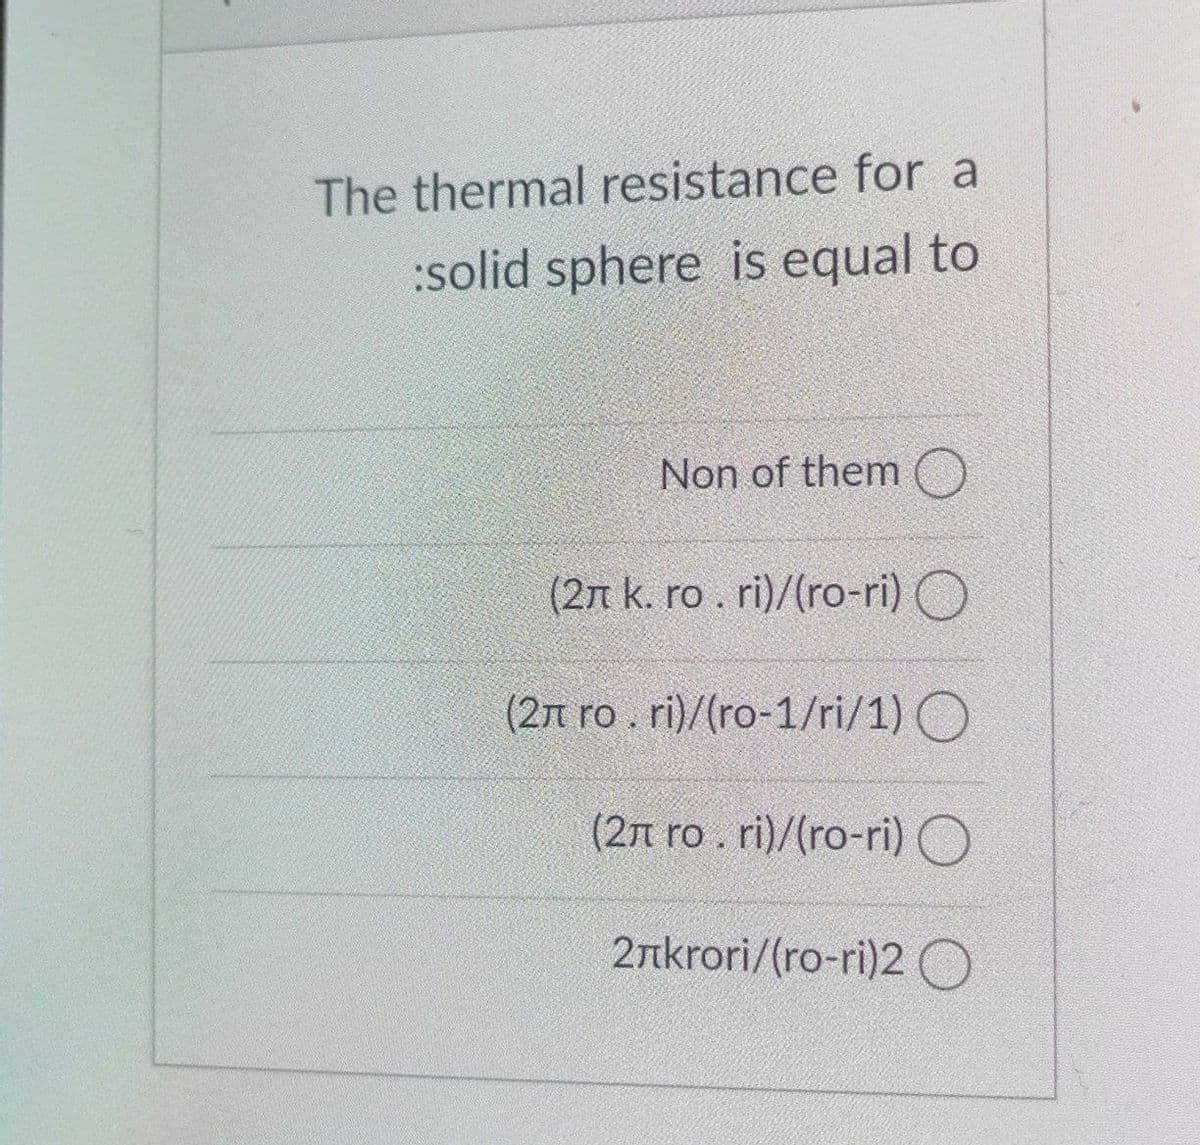 The thermal resistance for a
:solid sphere is equal to
Non of them O
(2n k. ro. ri)/(ro-ri) O
(2n ro. ri)/(ro-1/ri/1) O
(2n ro. ri)/(ro-ri) O
2nkrori/(ro-ri)2 O
